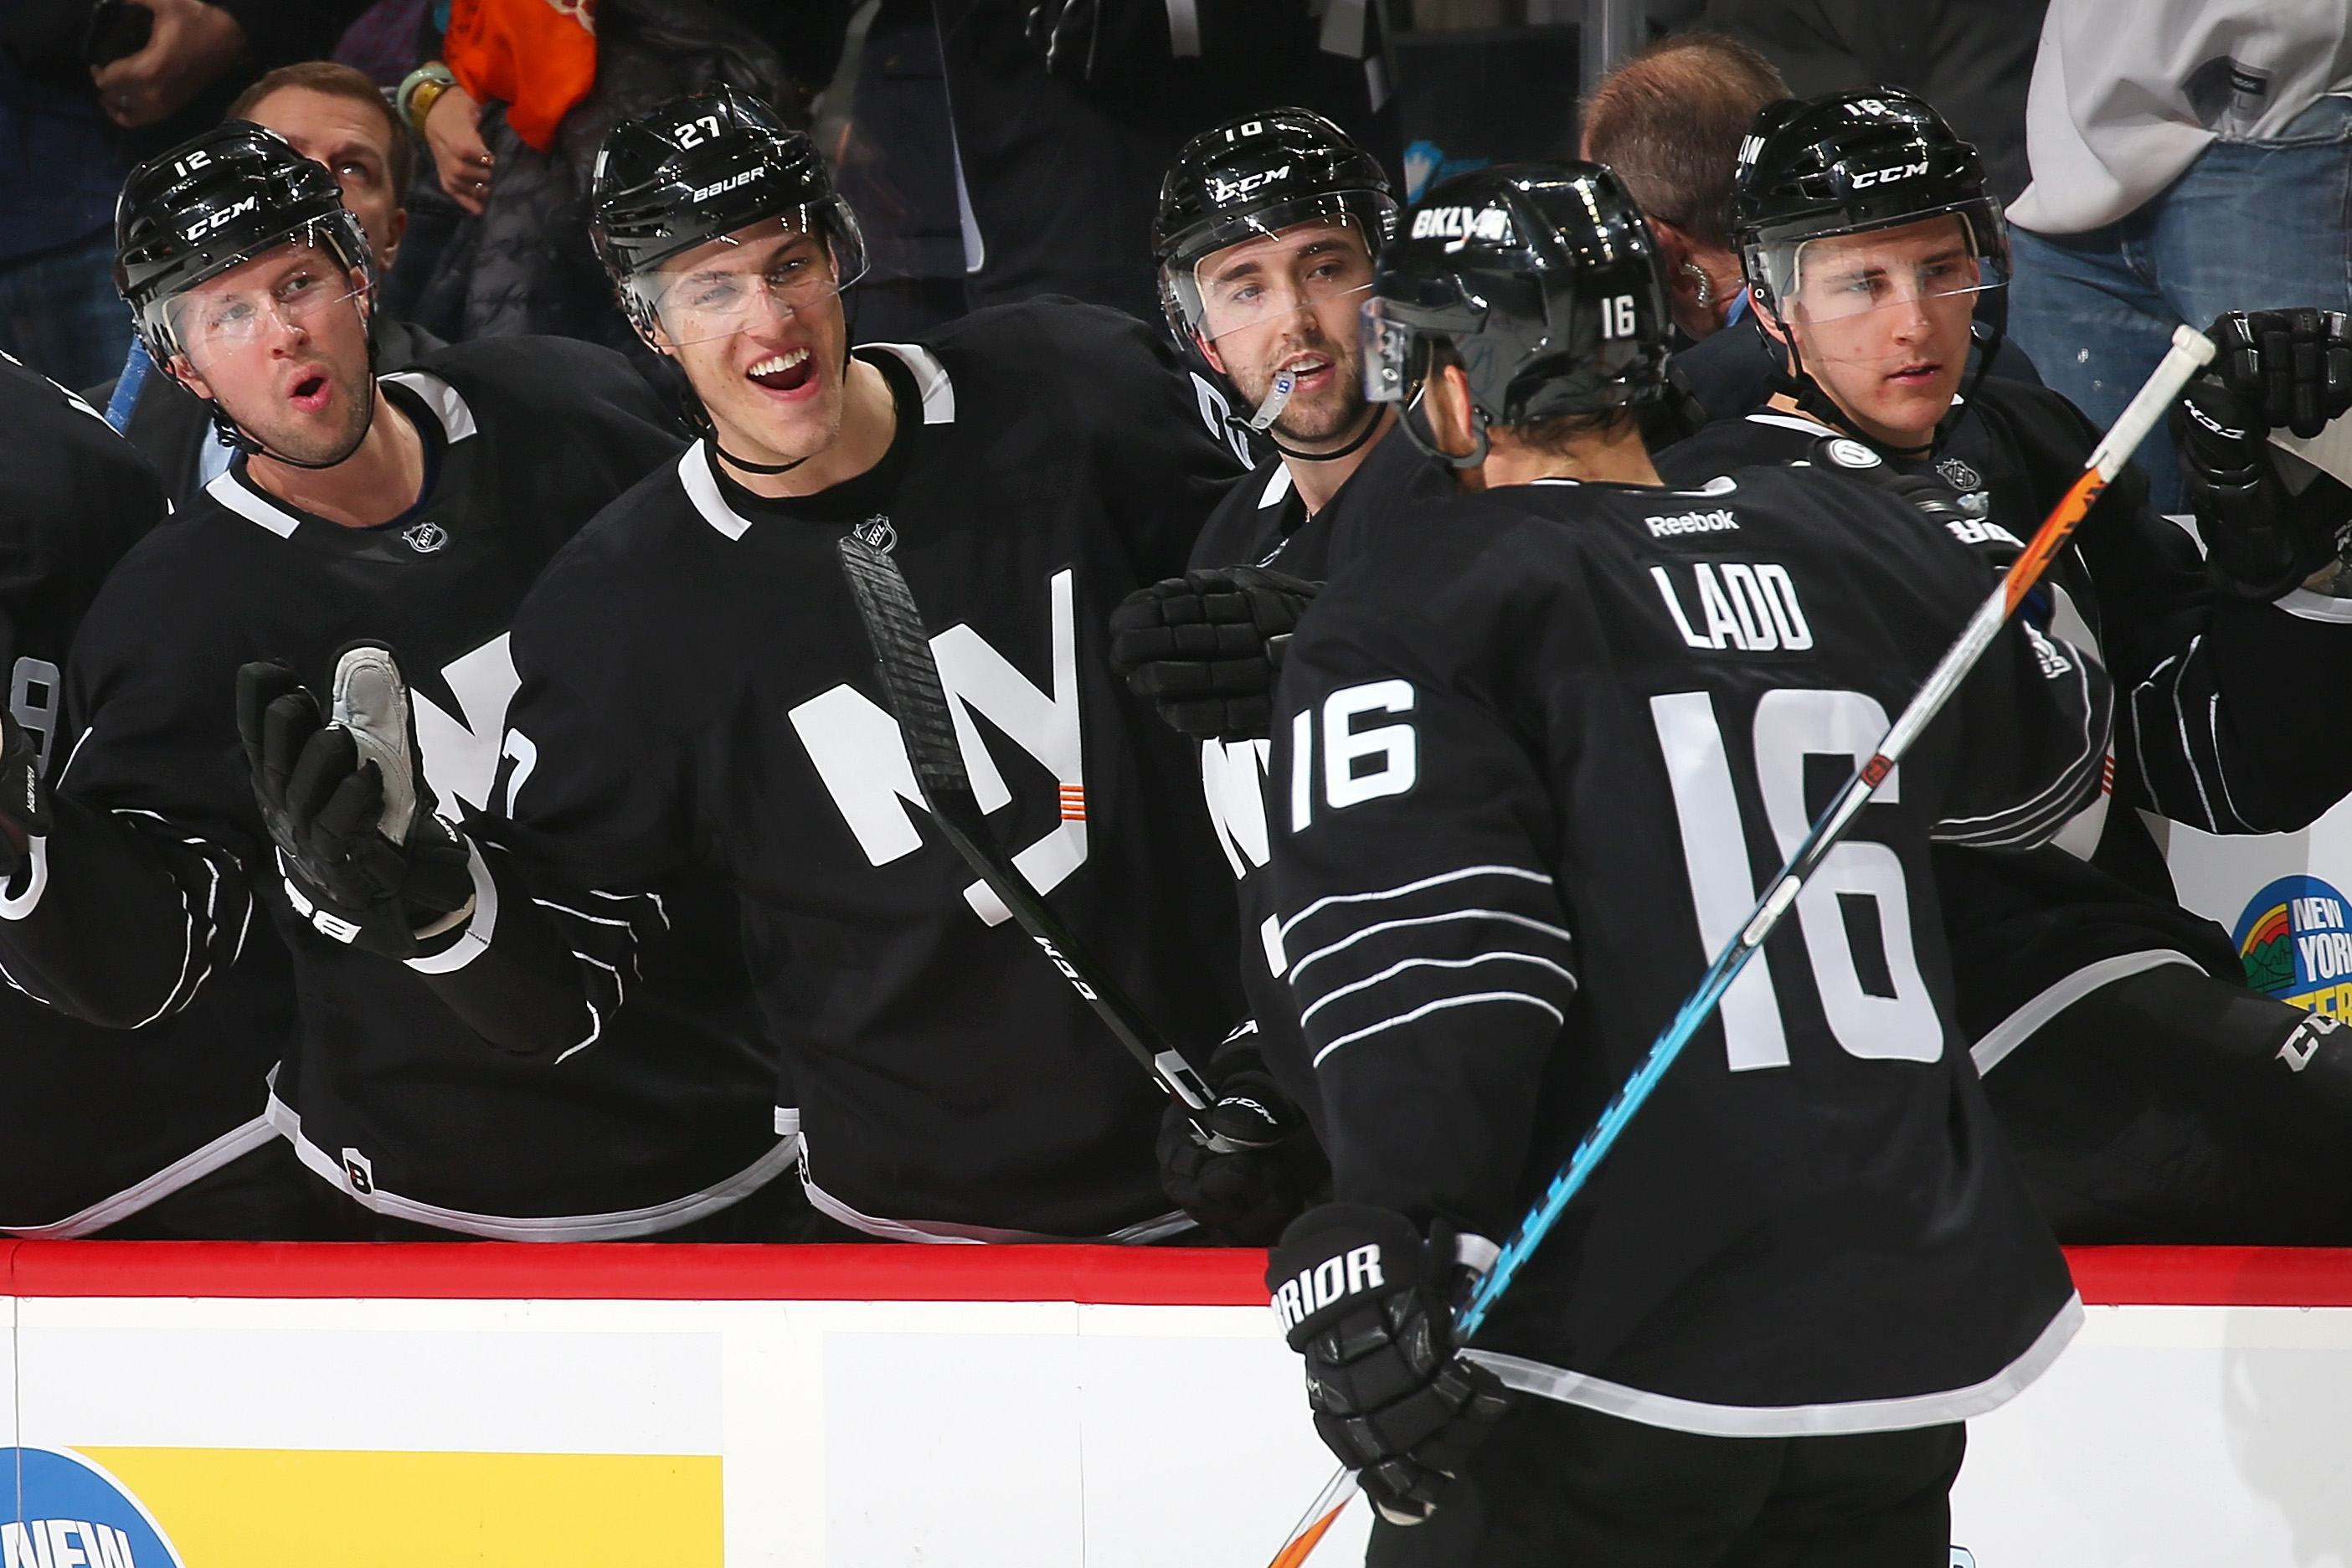 NEW YORK, NY - JANUARY 26: Andrew Ladd #16 of the New York Islanders celebrates his third period goal against the Montreal Canadiens with teammates at the Barclays Center on January 26, 2017 in Brooklyn borough of New York City. (Photo by Mike Stobe/NHLI via Getty Images)